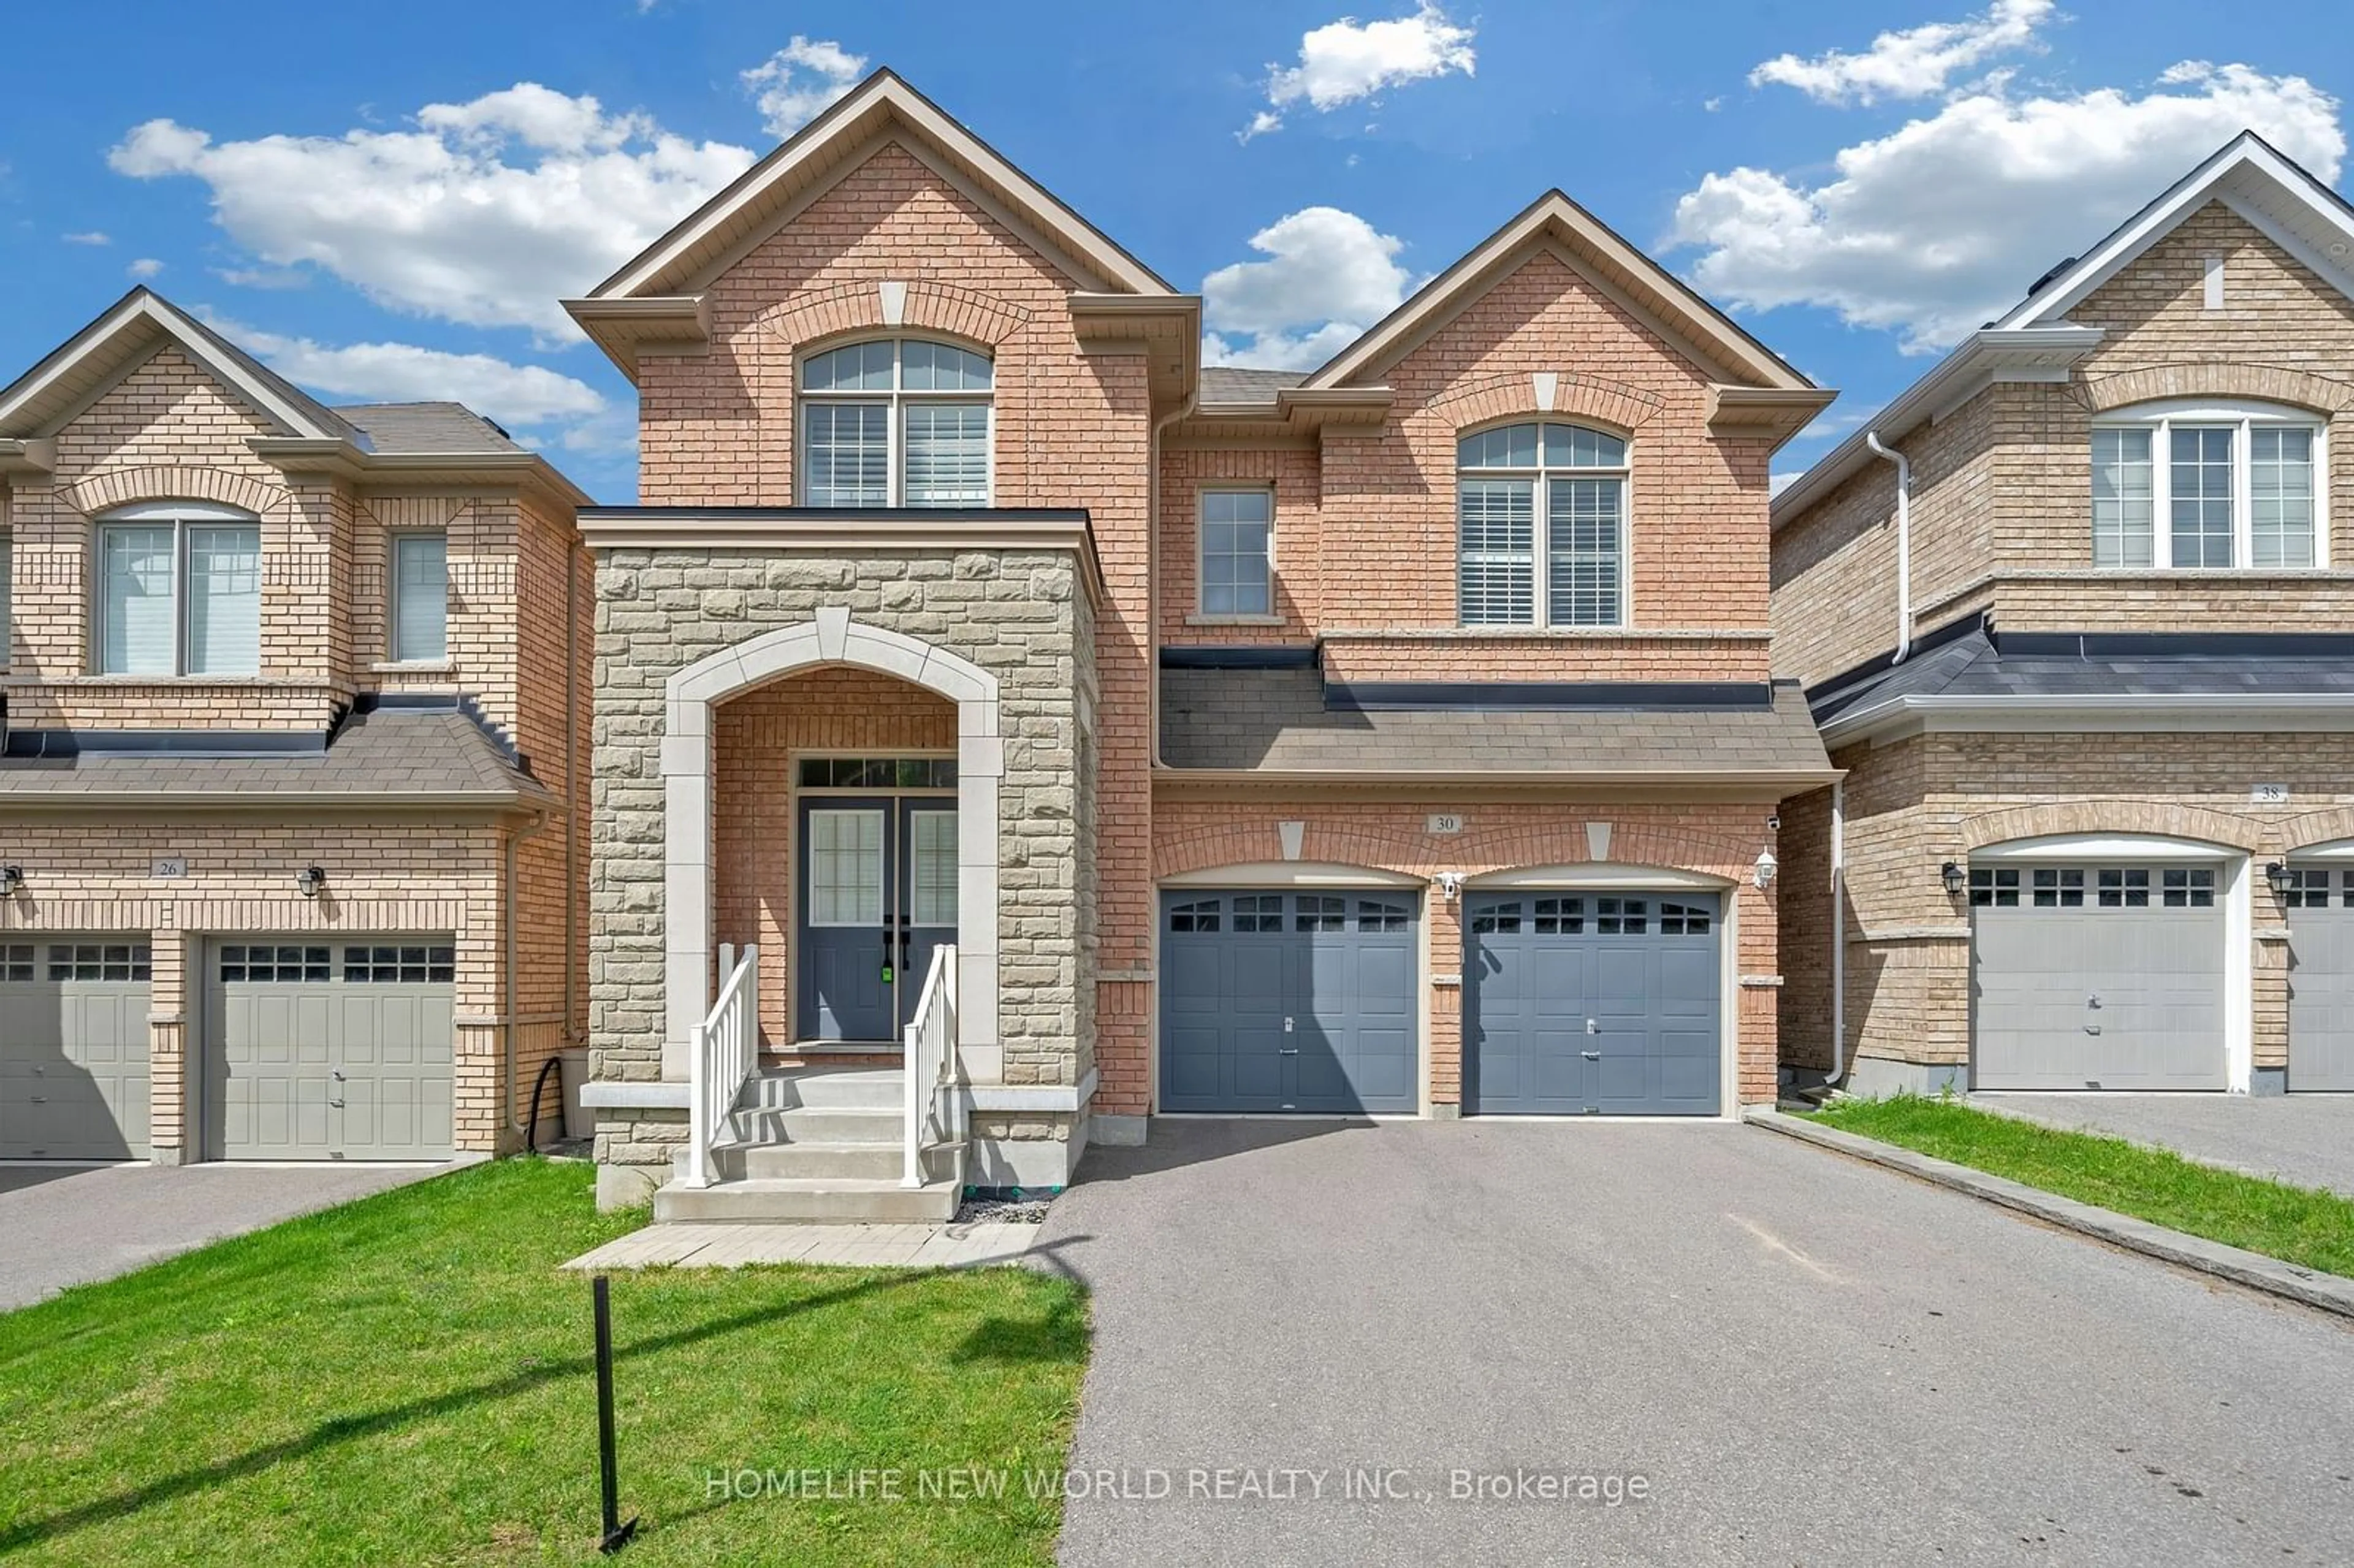 Home with brick exterior material for 30 Rothwell St, Aurora Ontario L4G 0V6